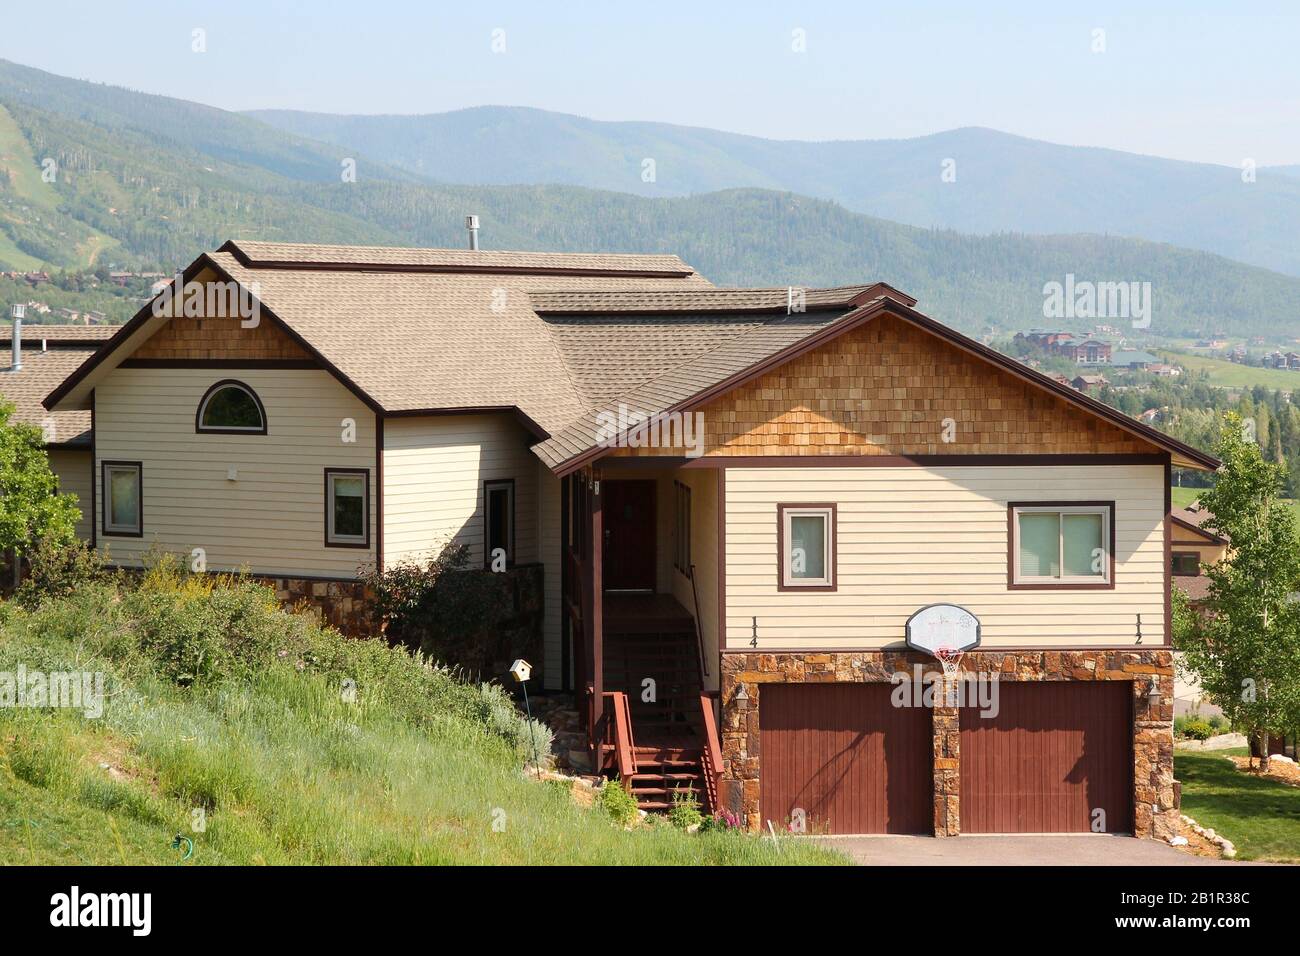 STEAMBOAT SPRINGS, COLORADO - JUNE 19, 2013: Generic house seen from public road in Steamboat Springs, Colorado. Over 5 million homes are sold annuall Stock Photo